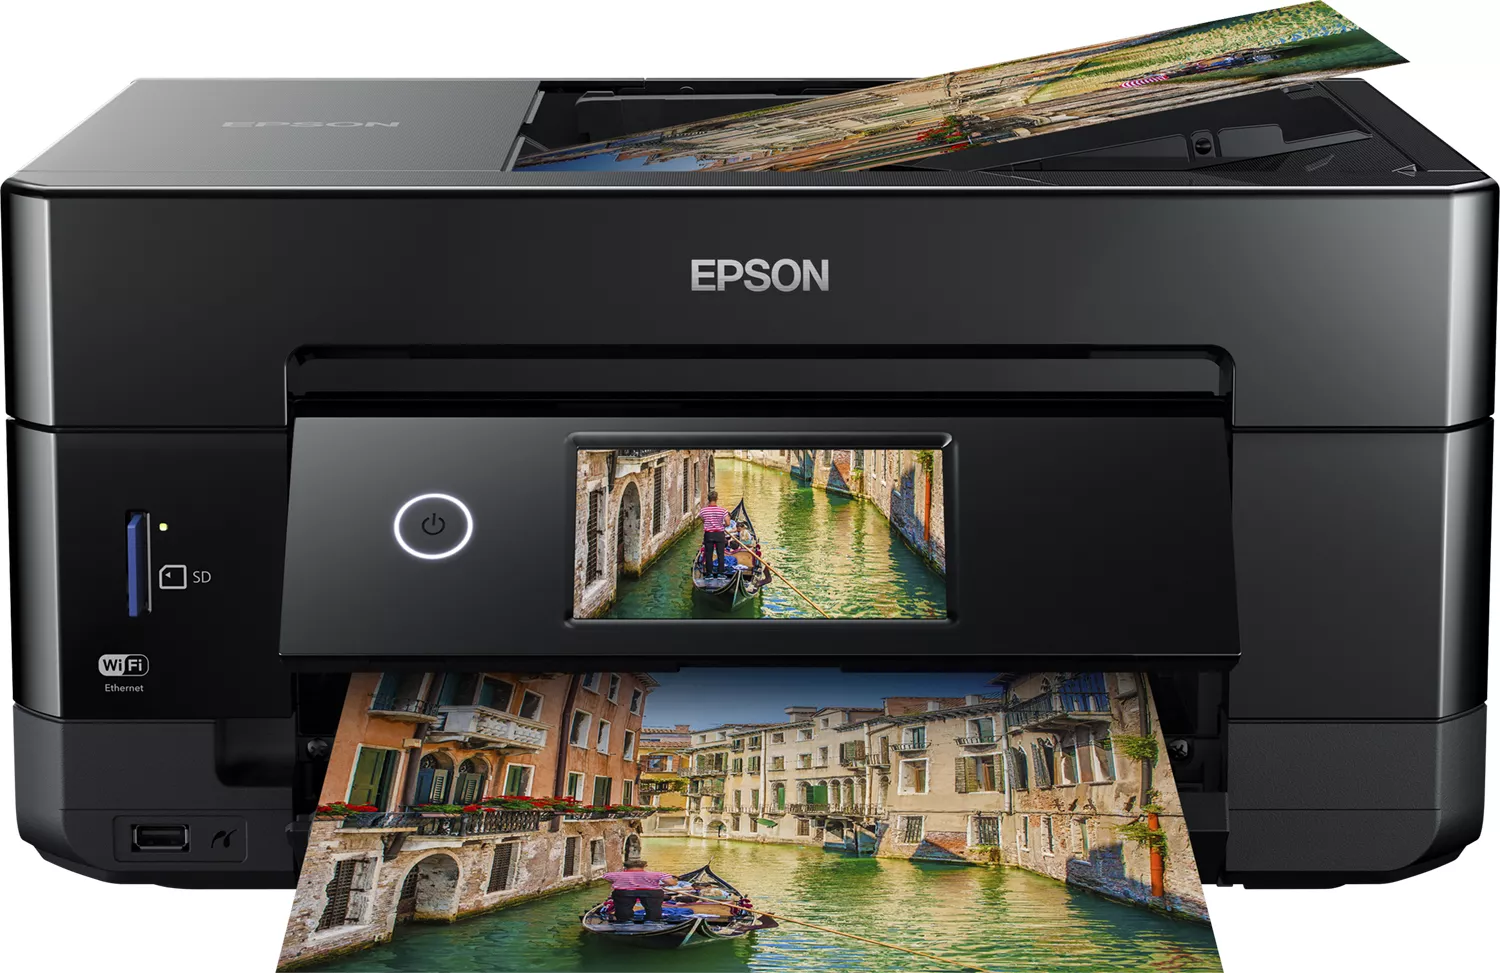 Vente Multifonctions Jet d'encre EPSON Expression Premium XP-7100 Small-in-One MFP